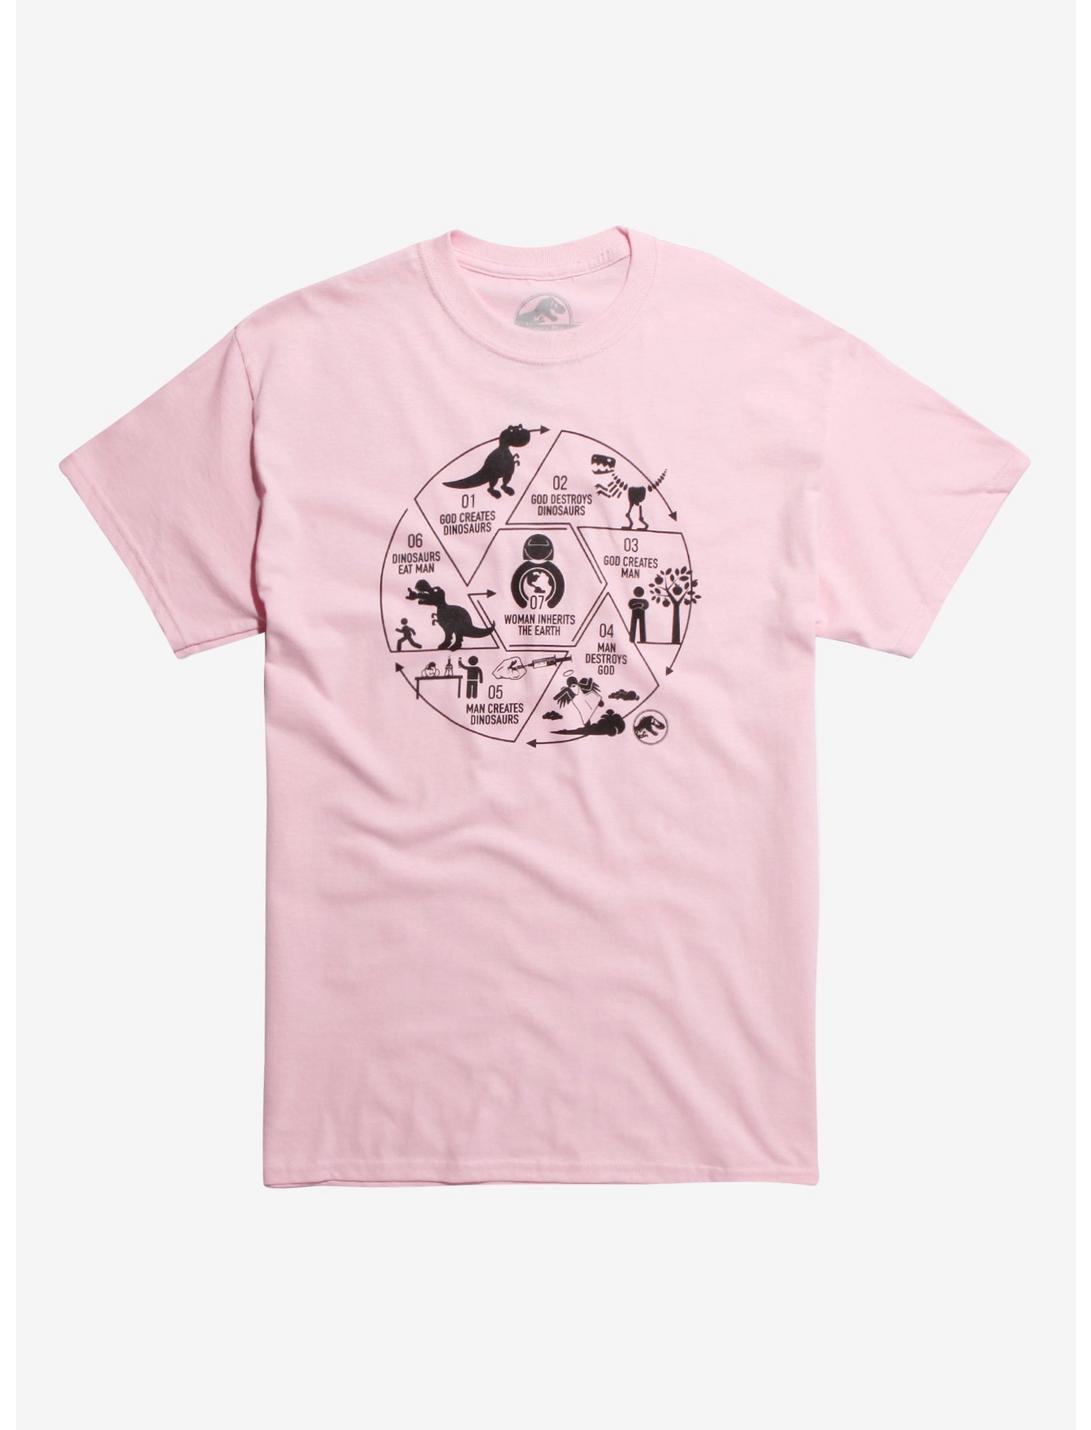 Jurassic Park Timeline T-Shirt Hot Topic Exclusive, PINK, hi-res